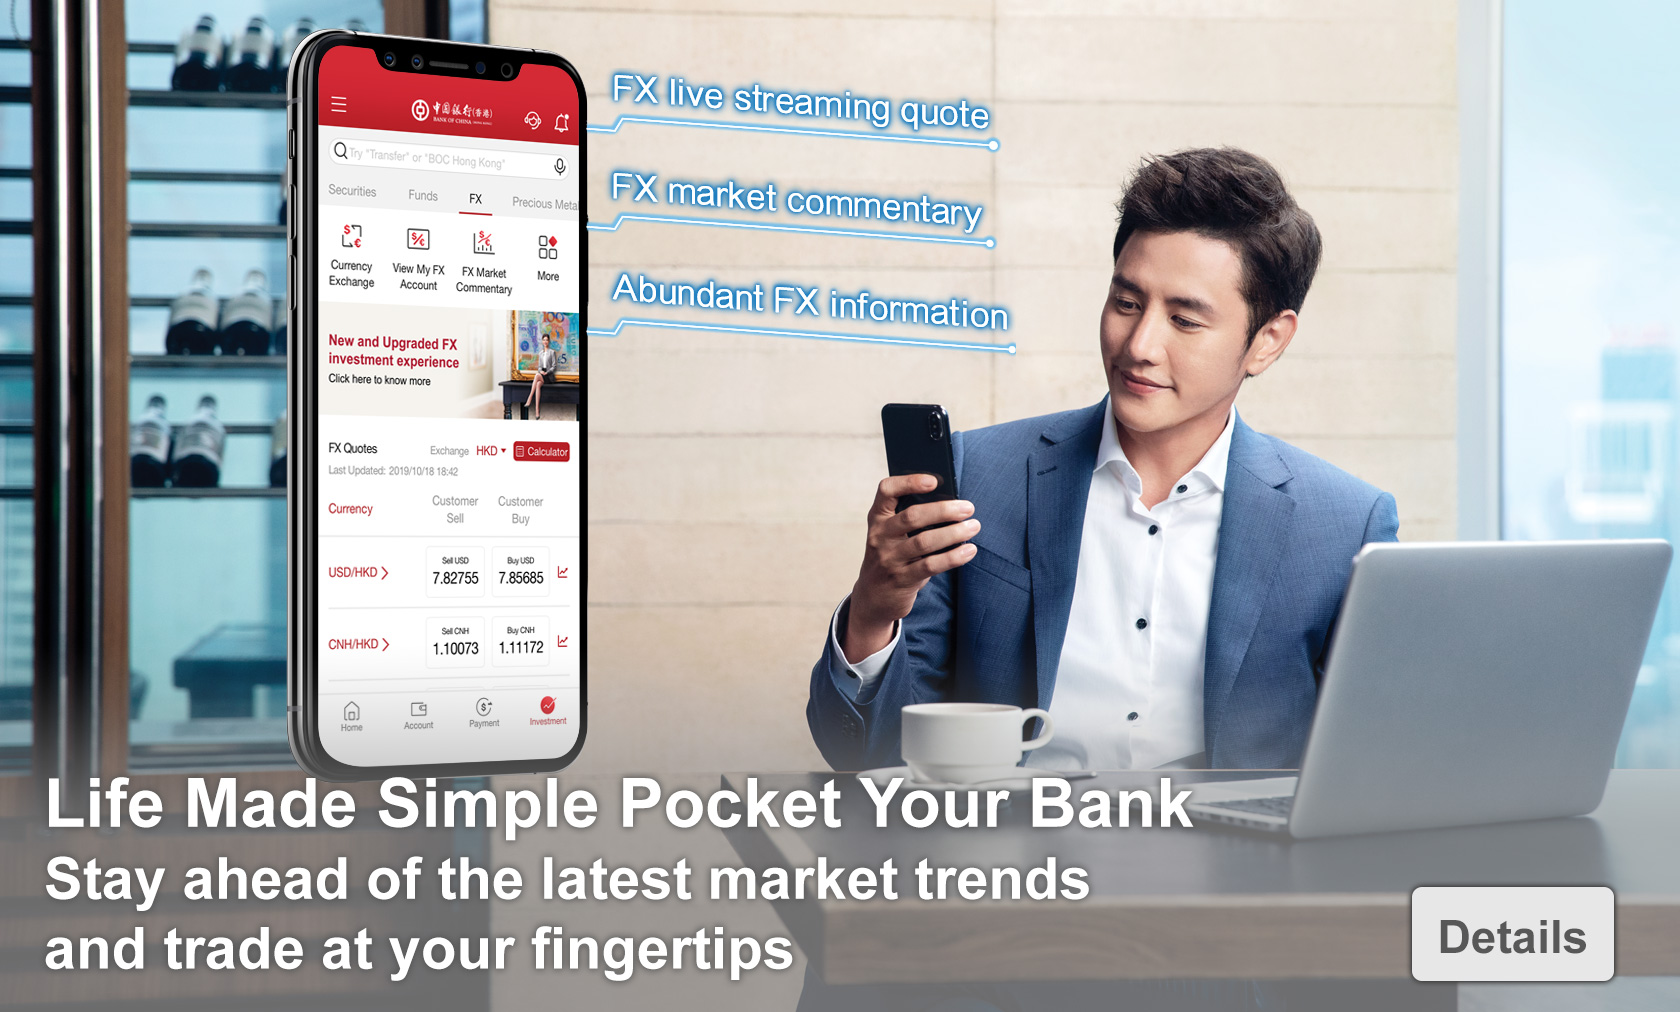 Life Made Simple Pocket Your Bank
        Stay ahead of the latest market trends and trade at your fingertips